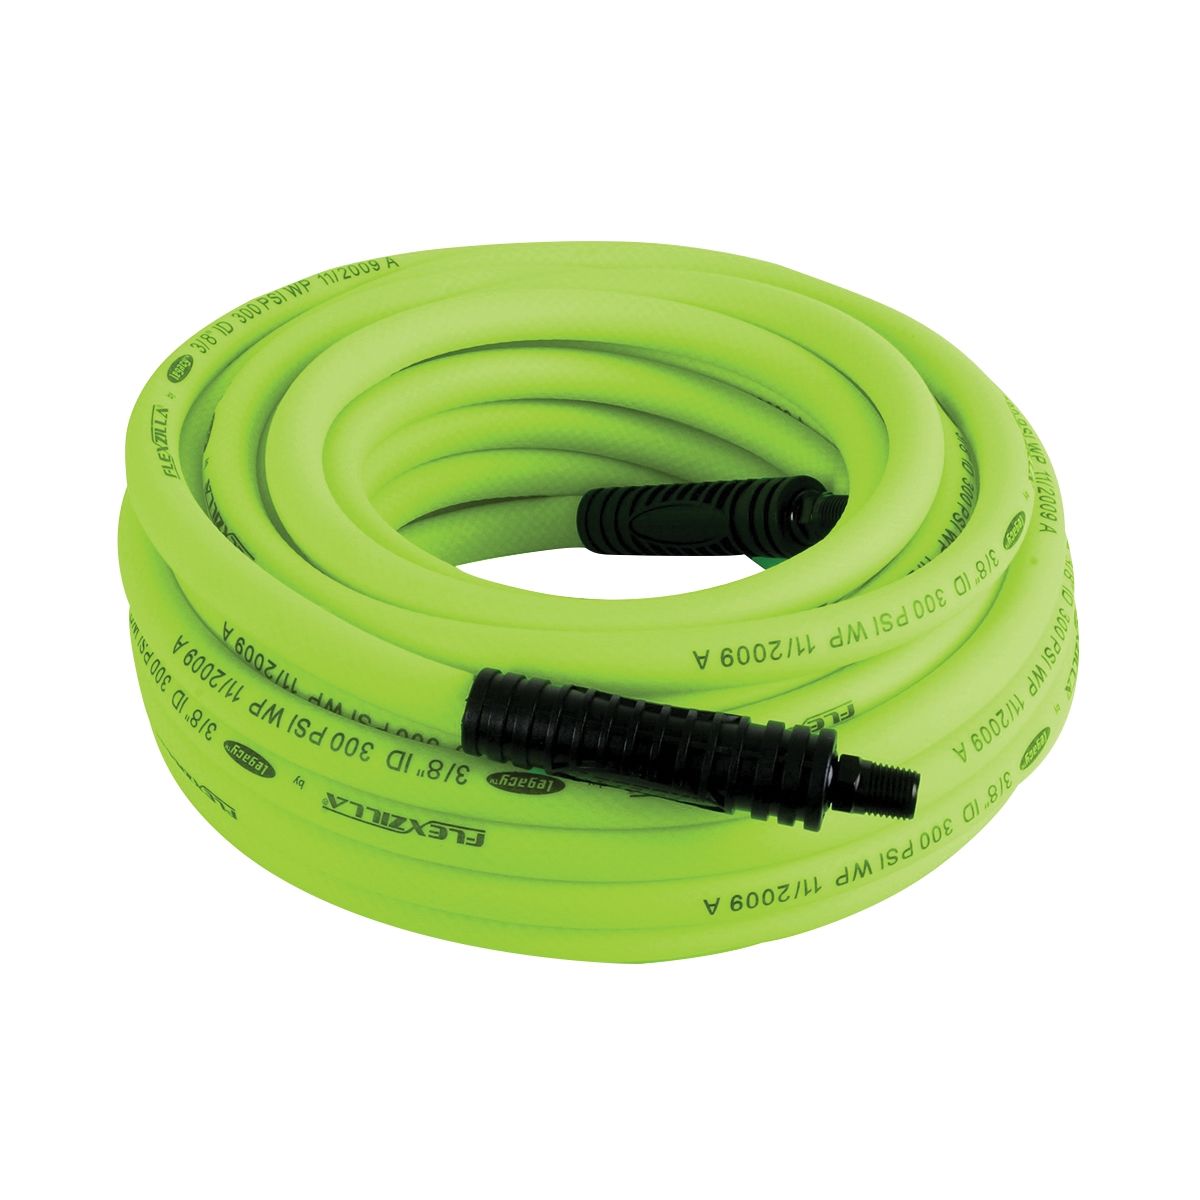 50 ft. Green LEGACY 3/8 in. Coiled Air Hose